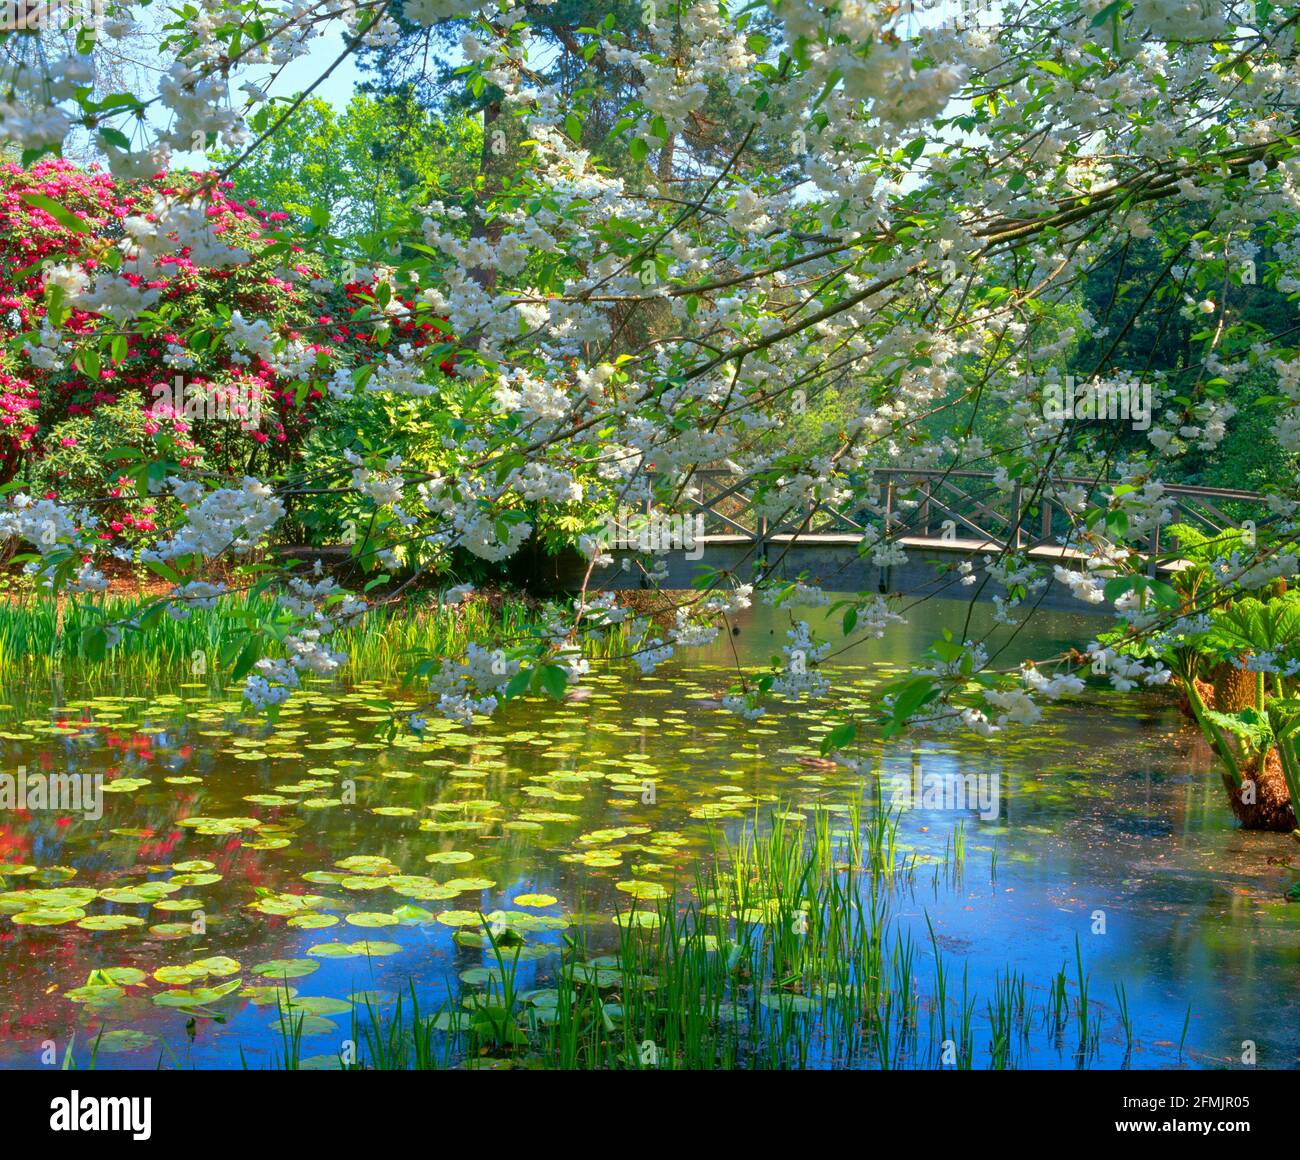 UK, England, Cheshire, Tatton Park and Gardens, bridge over lilly pool, spring Stock Photo